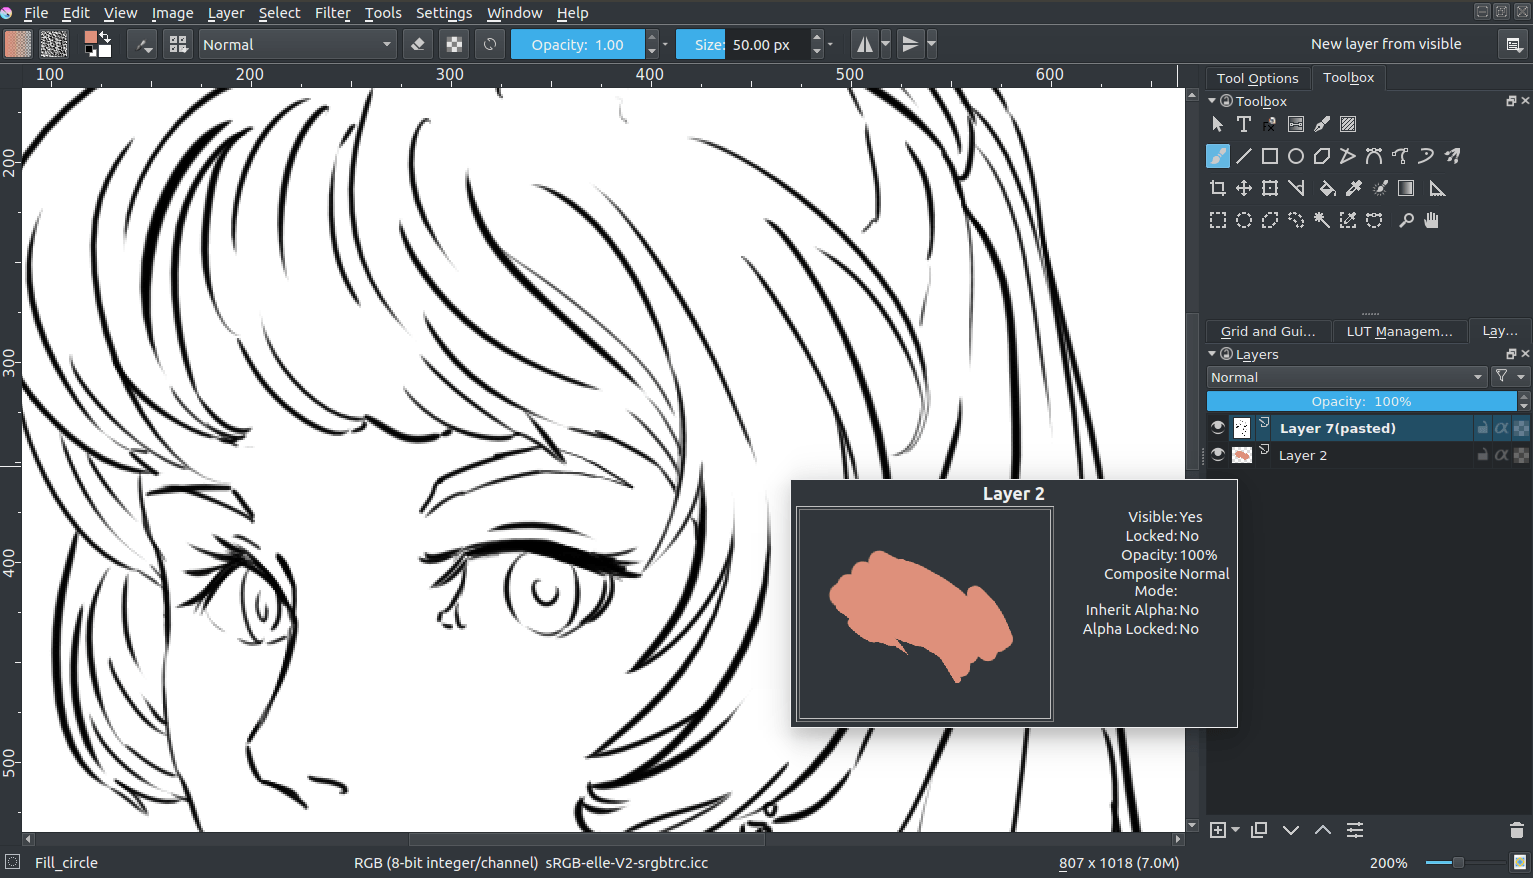 Layer structure for flatting in krita.